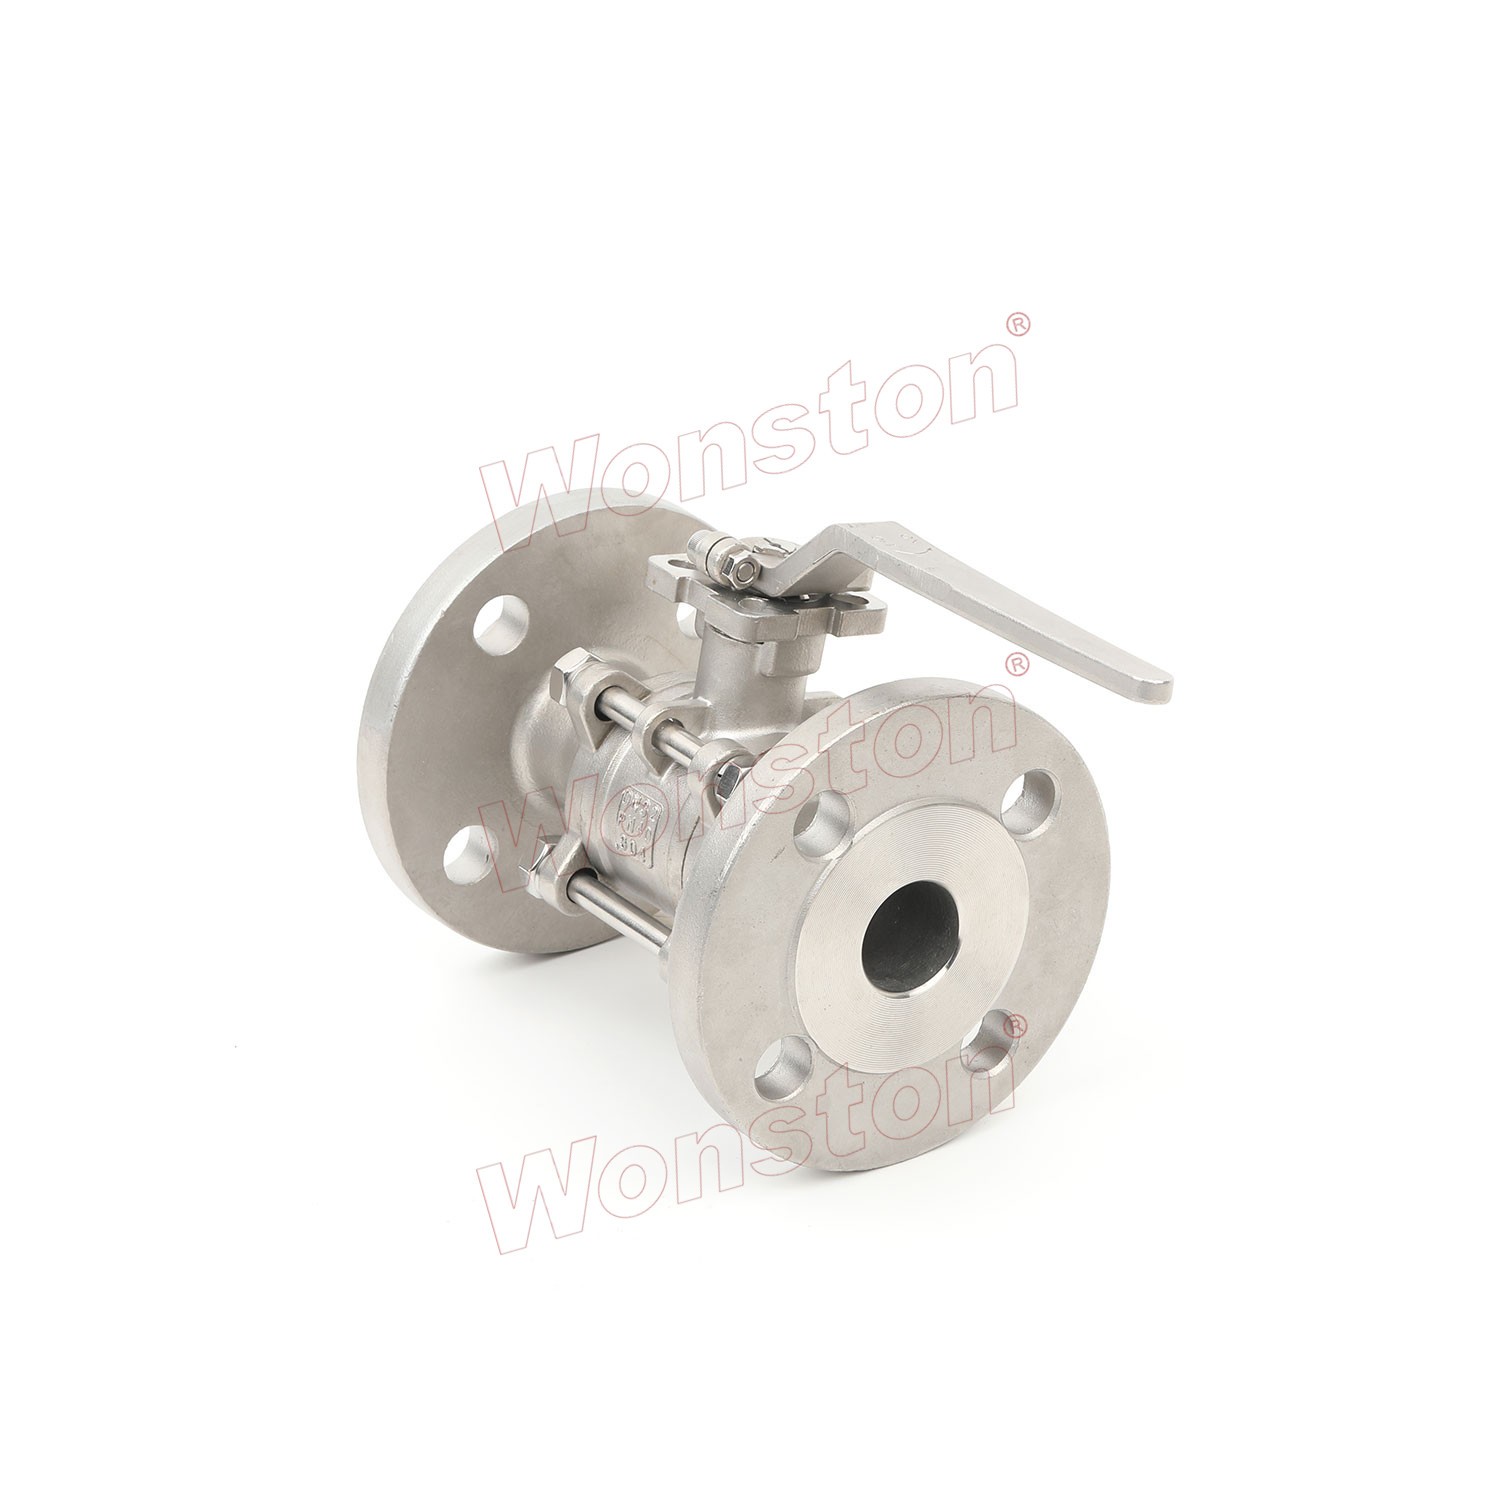 3PC Ball Valve Flanged End Direct Mounting Pad 150LB